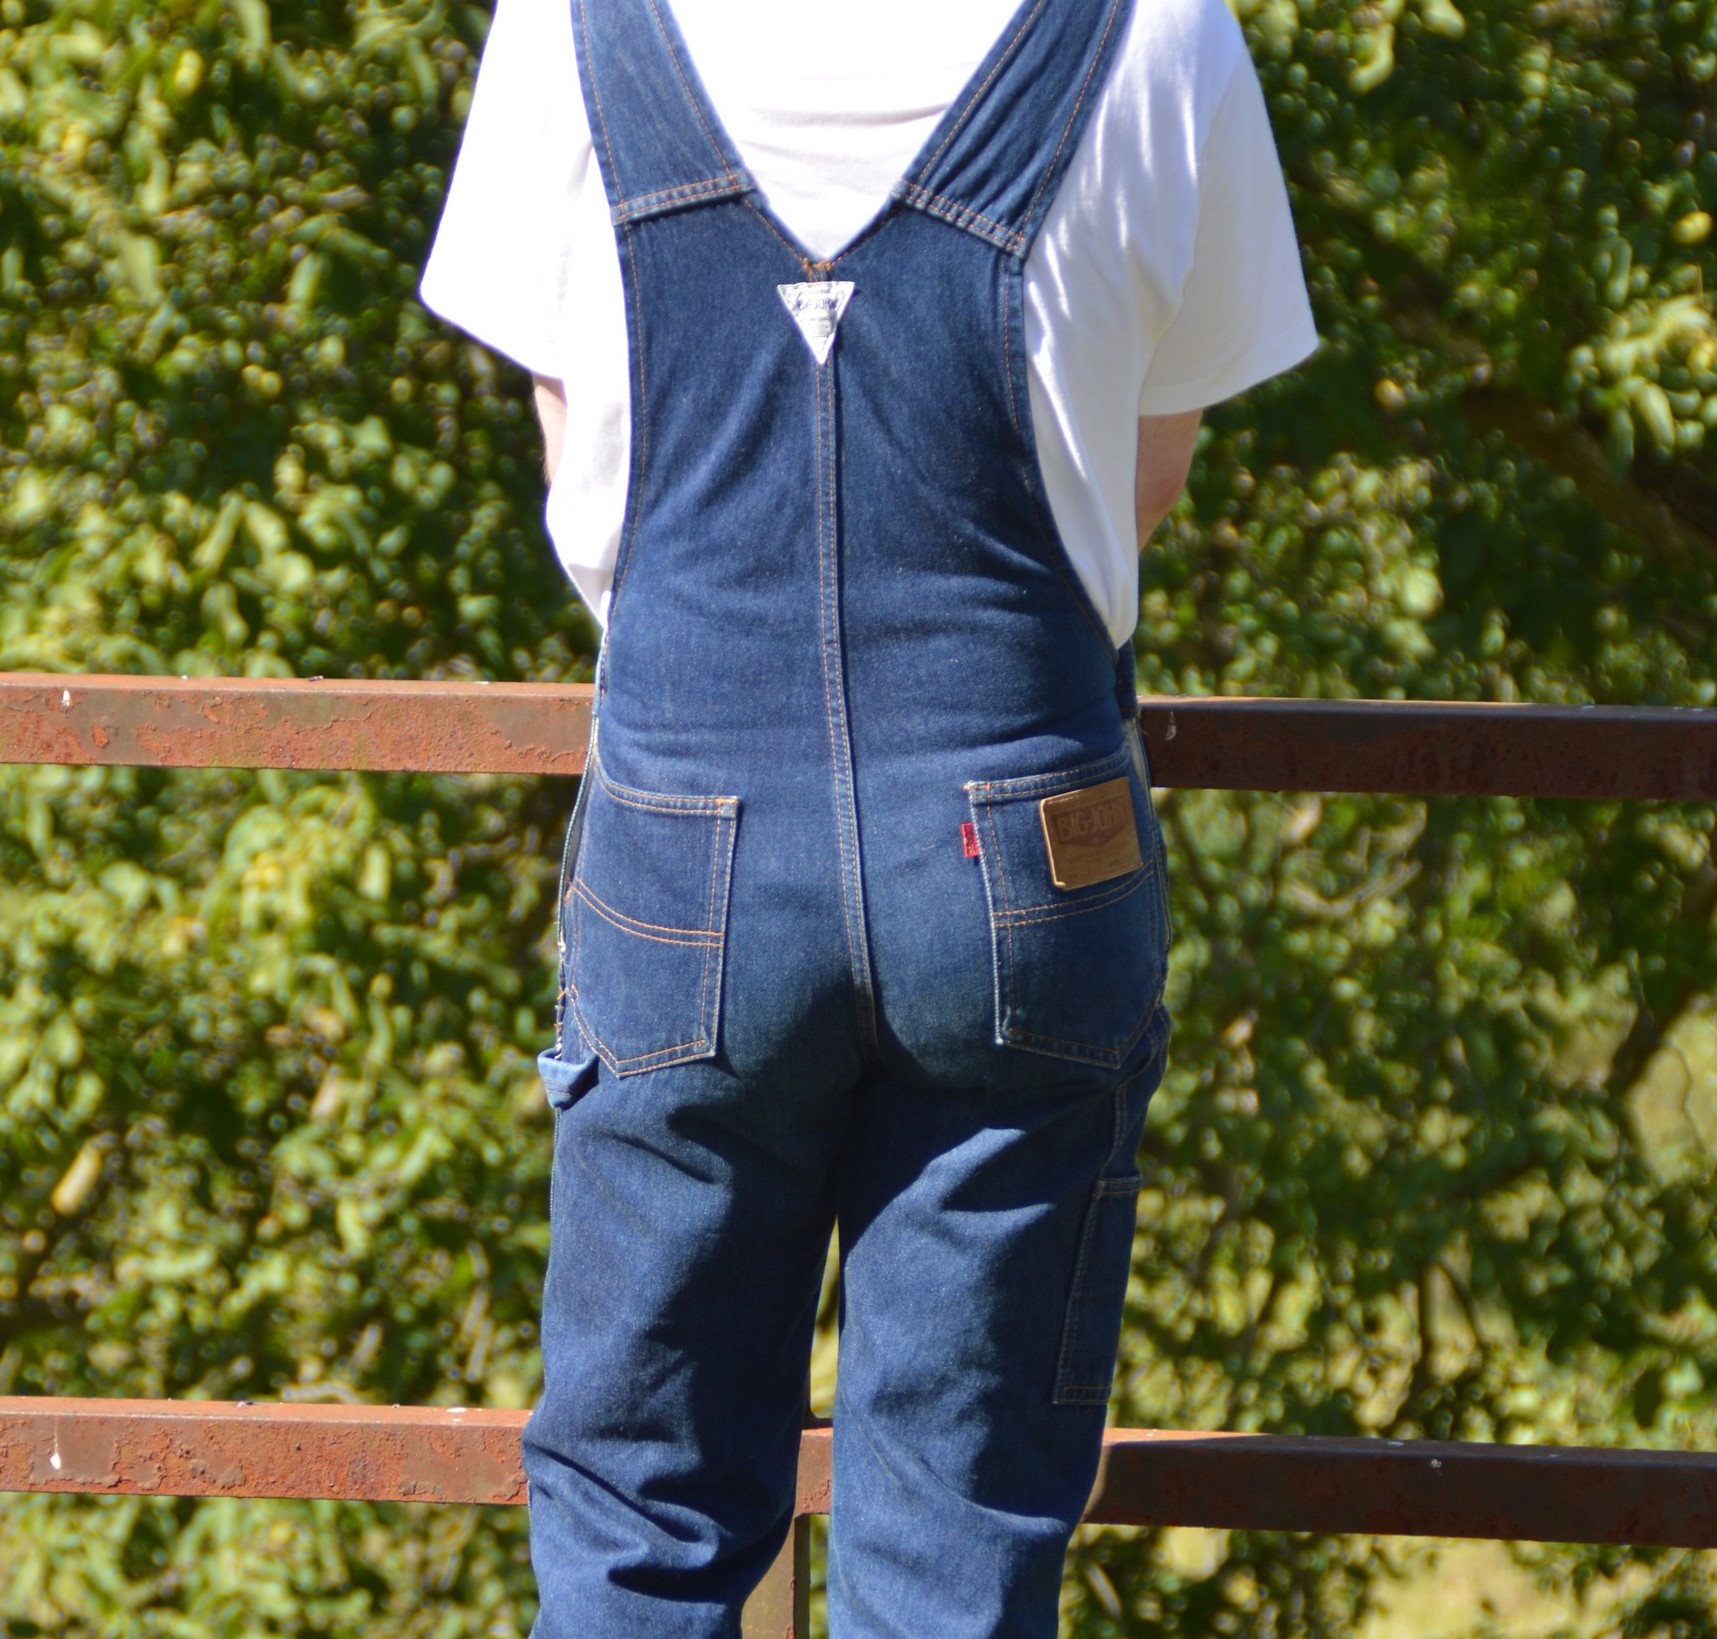 I'm a bit younger, but always like to meet fellow overalls fans! 